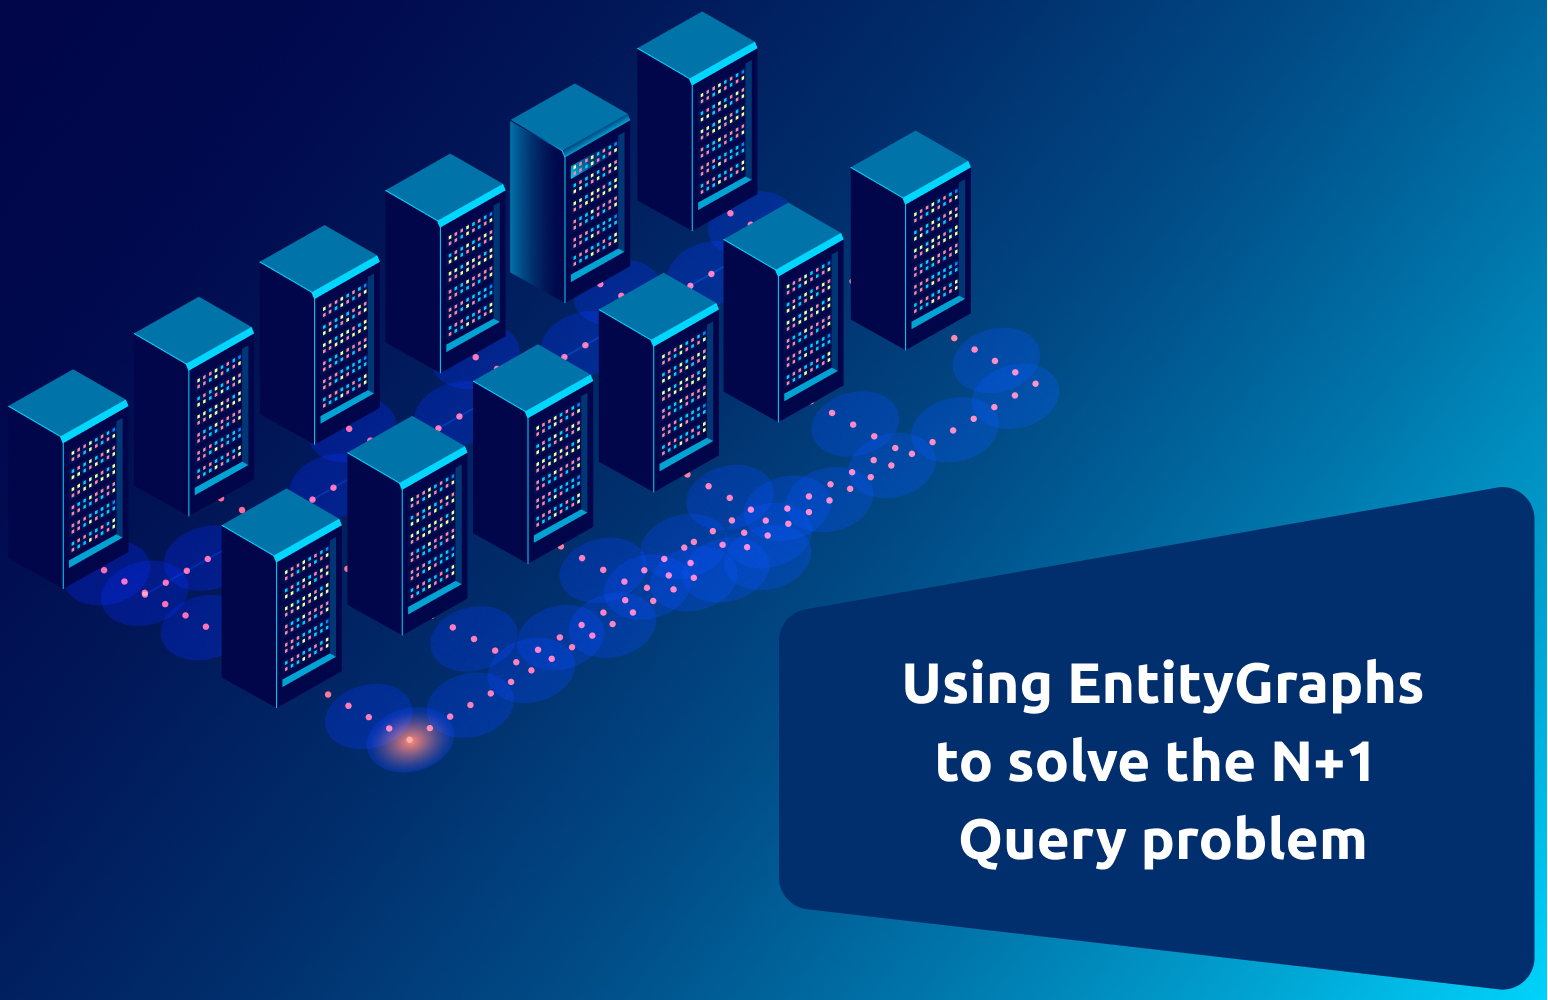 Using EntityGraphs to solve the N+1 Query problem